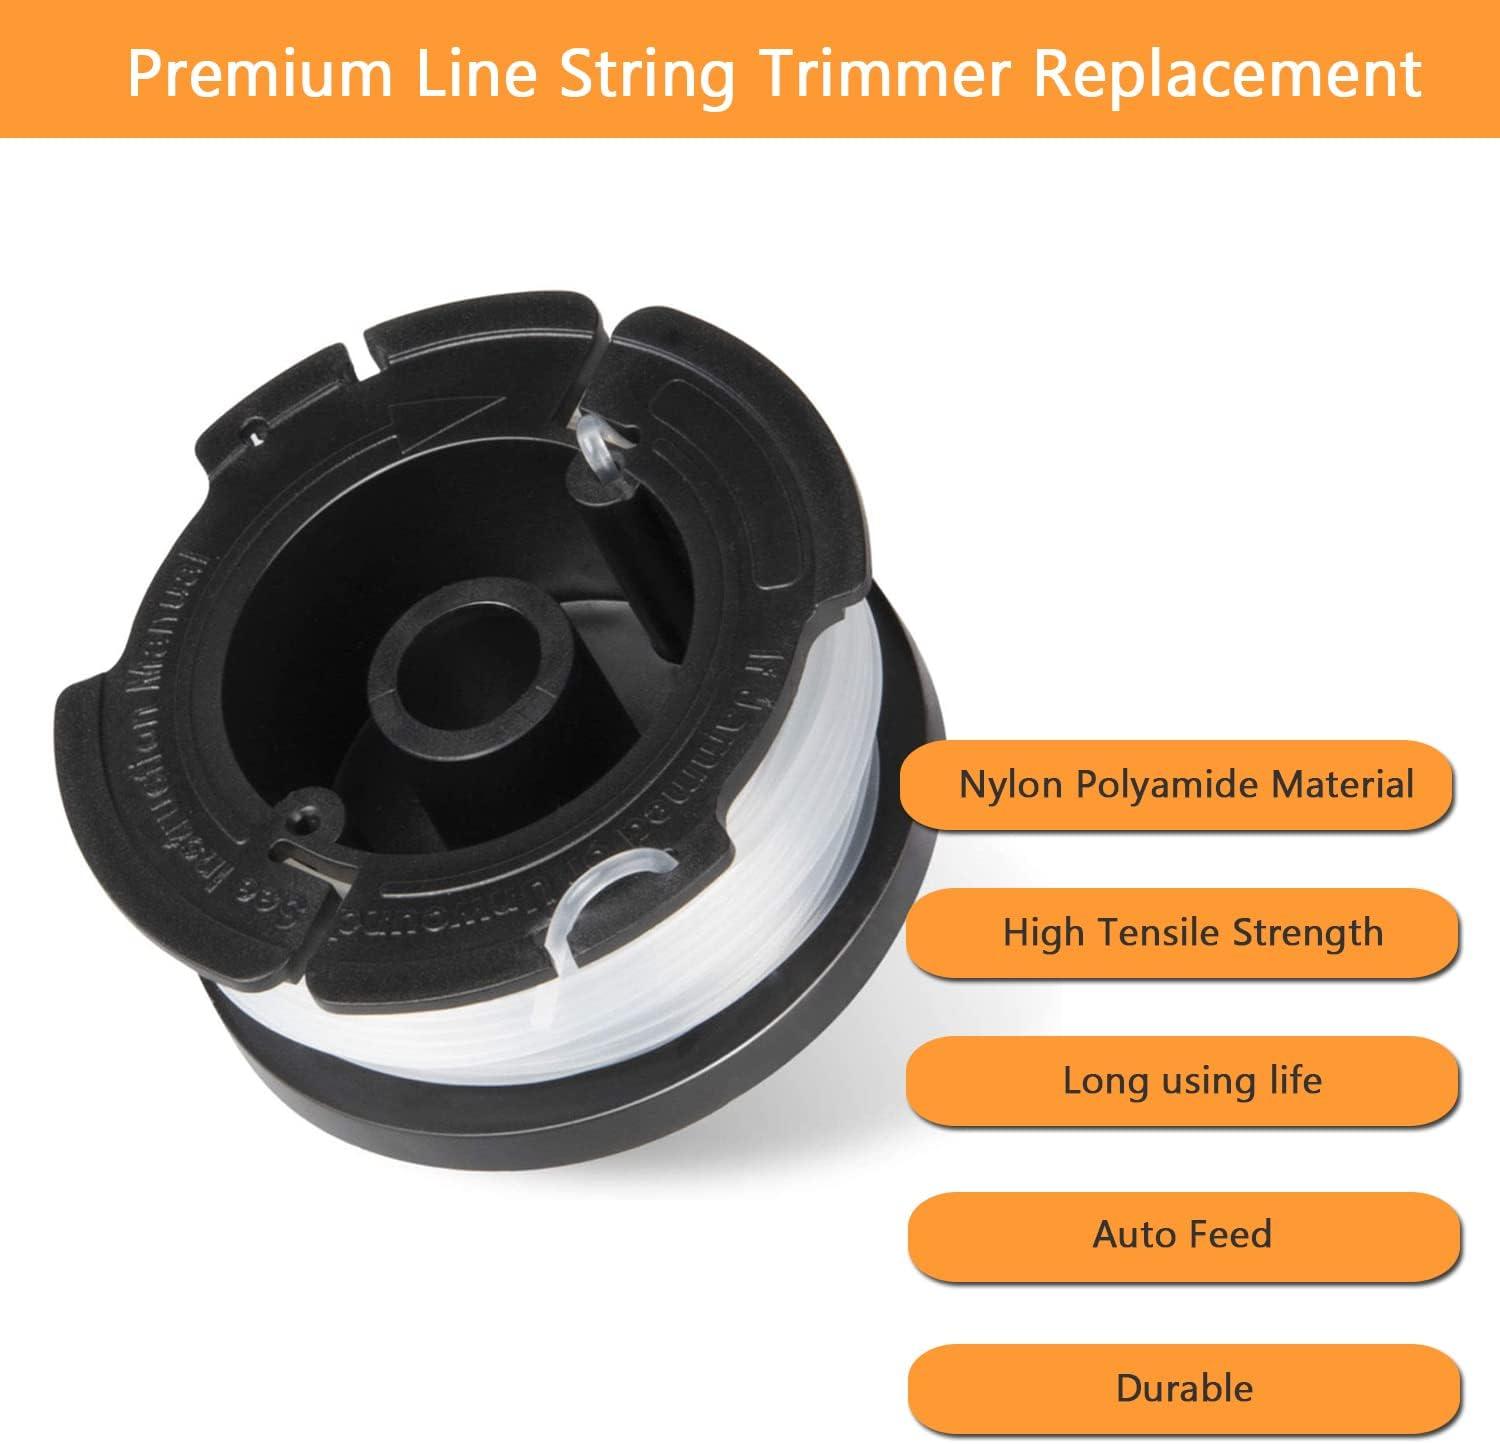 Black Decker String Trimmer Replacement Parts Line Spool Weed